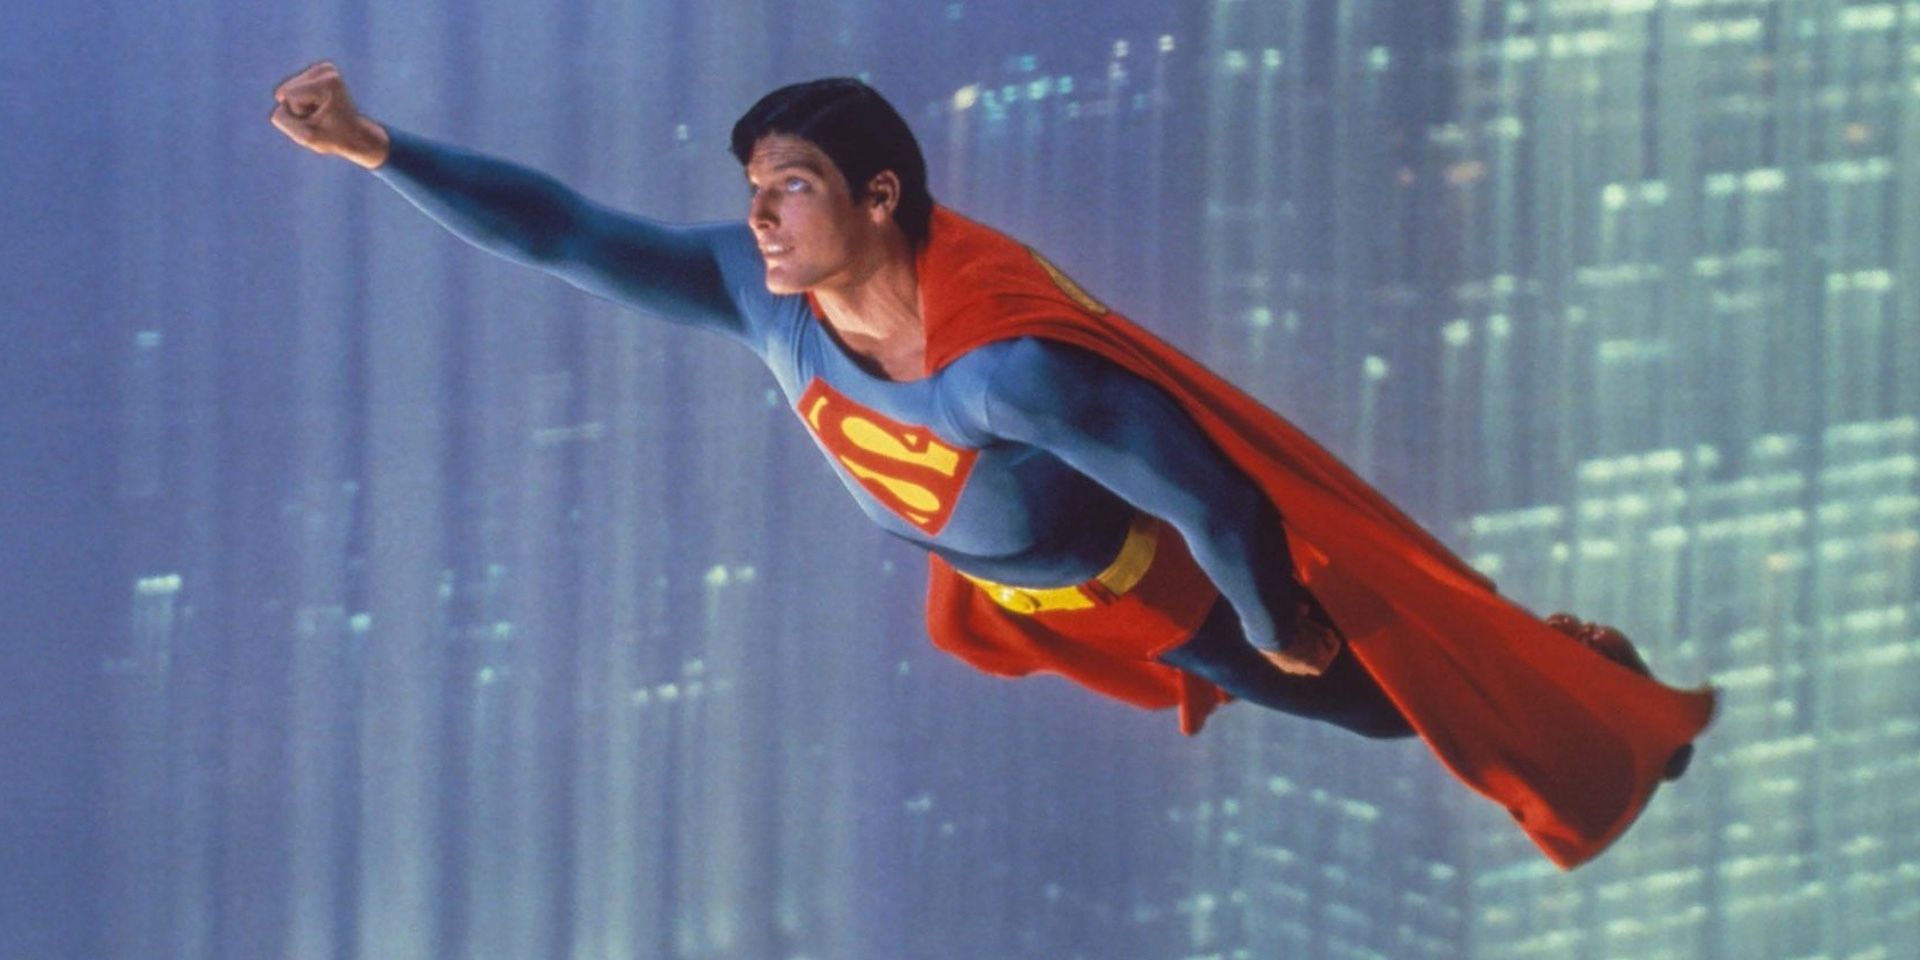 Christopher Reeve in Superman: The Movie taking flight with his right arm raised.